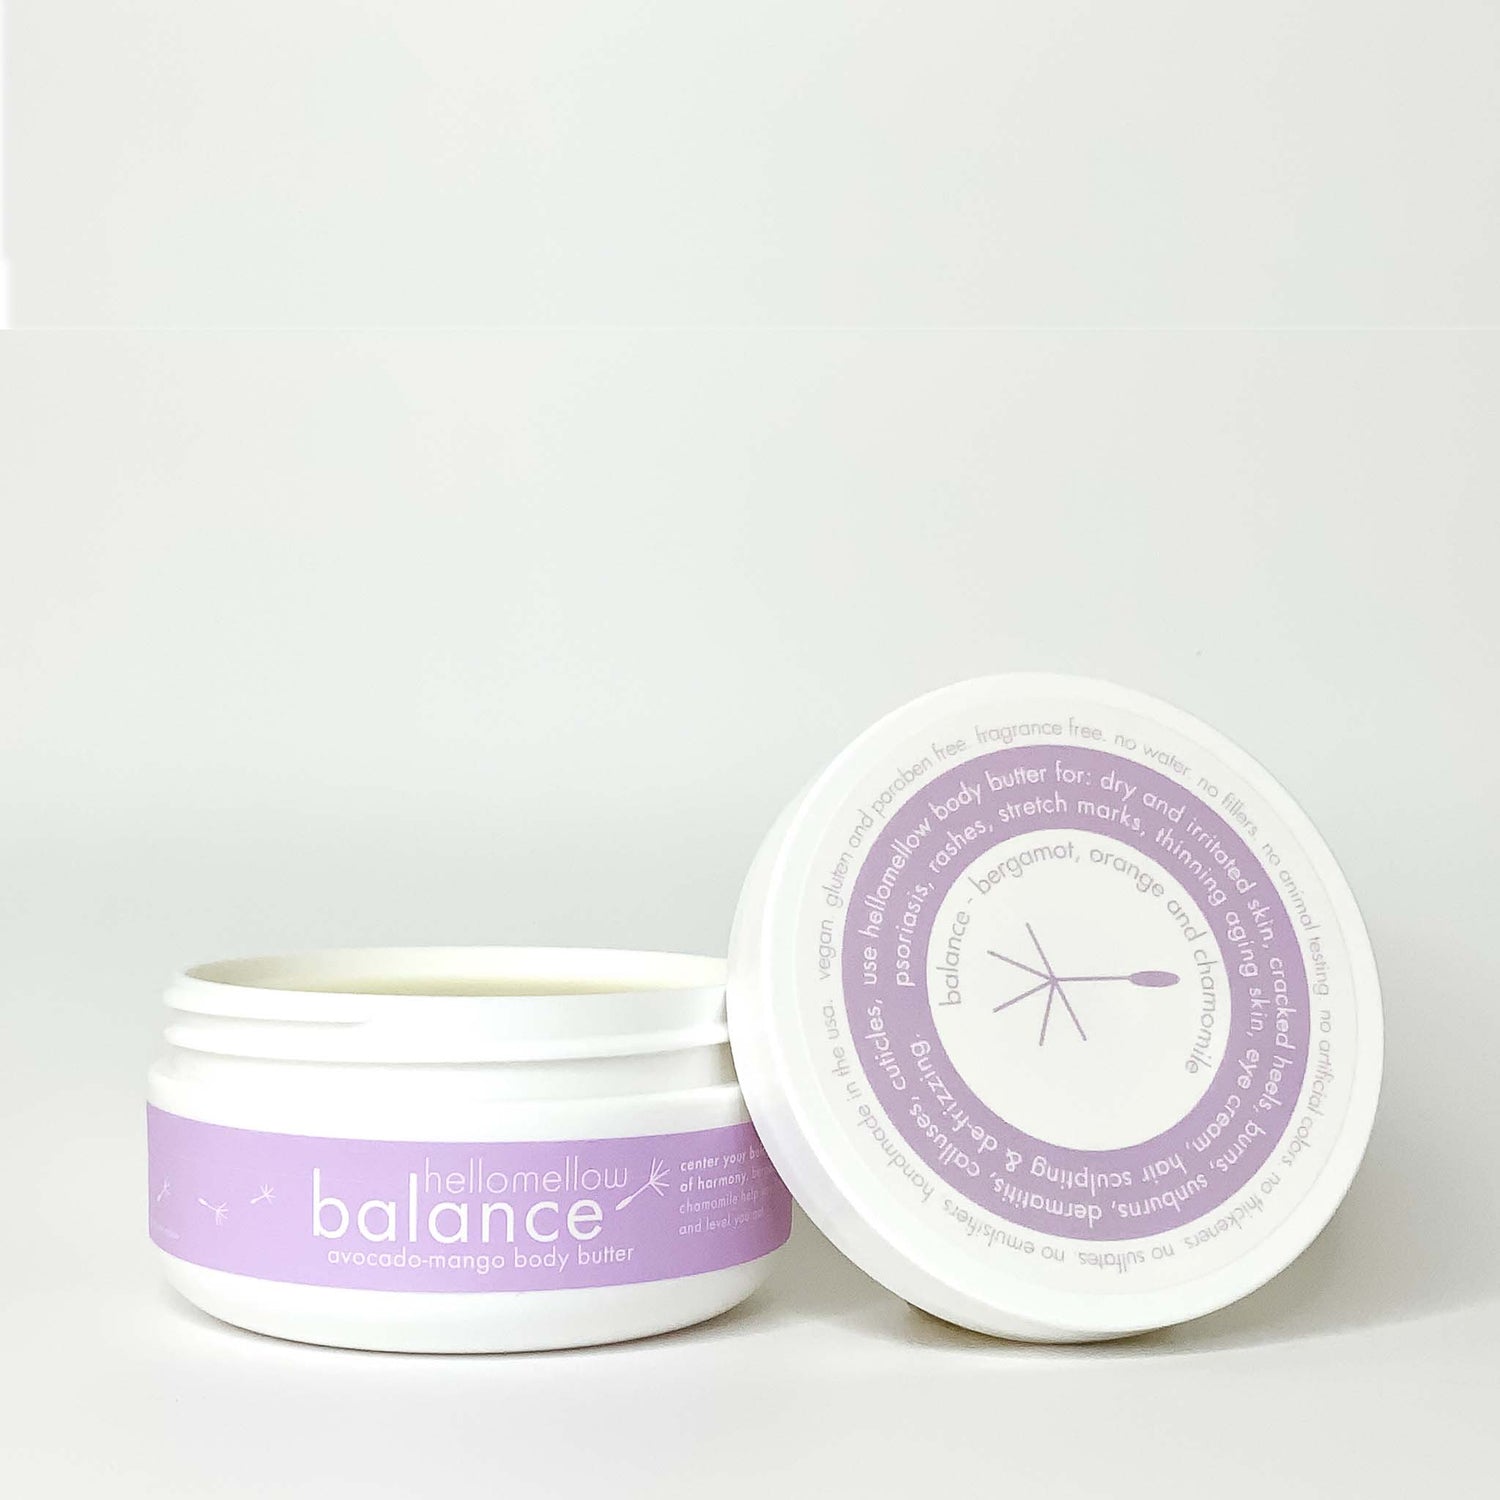 4 oz body butter and free socks